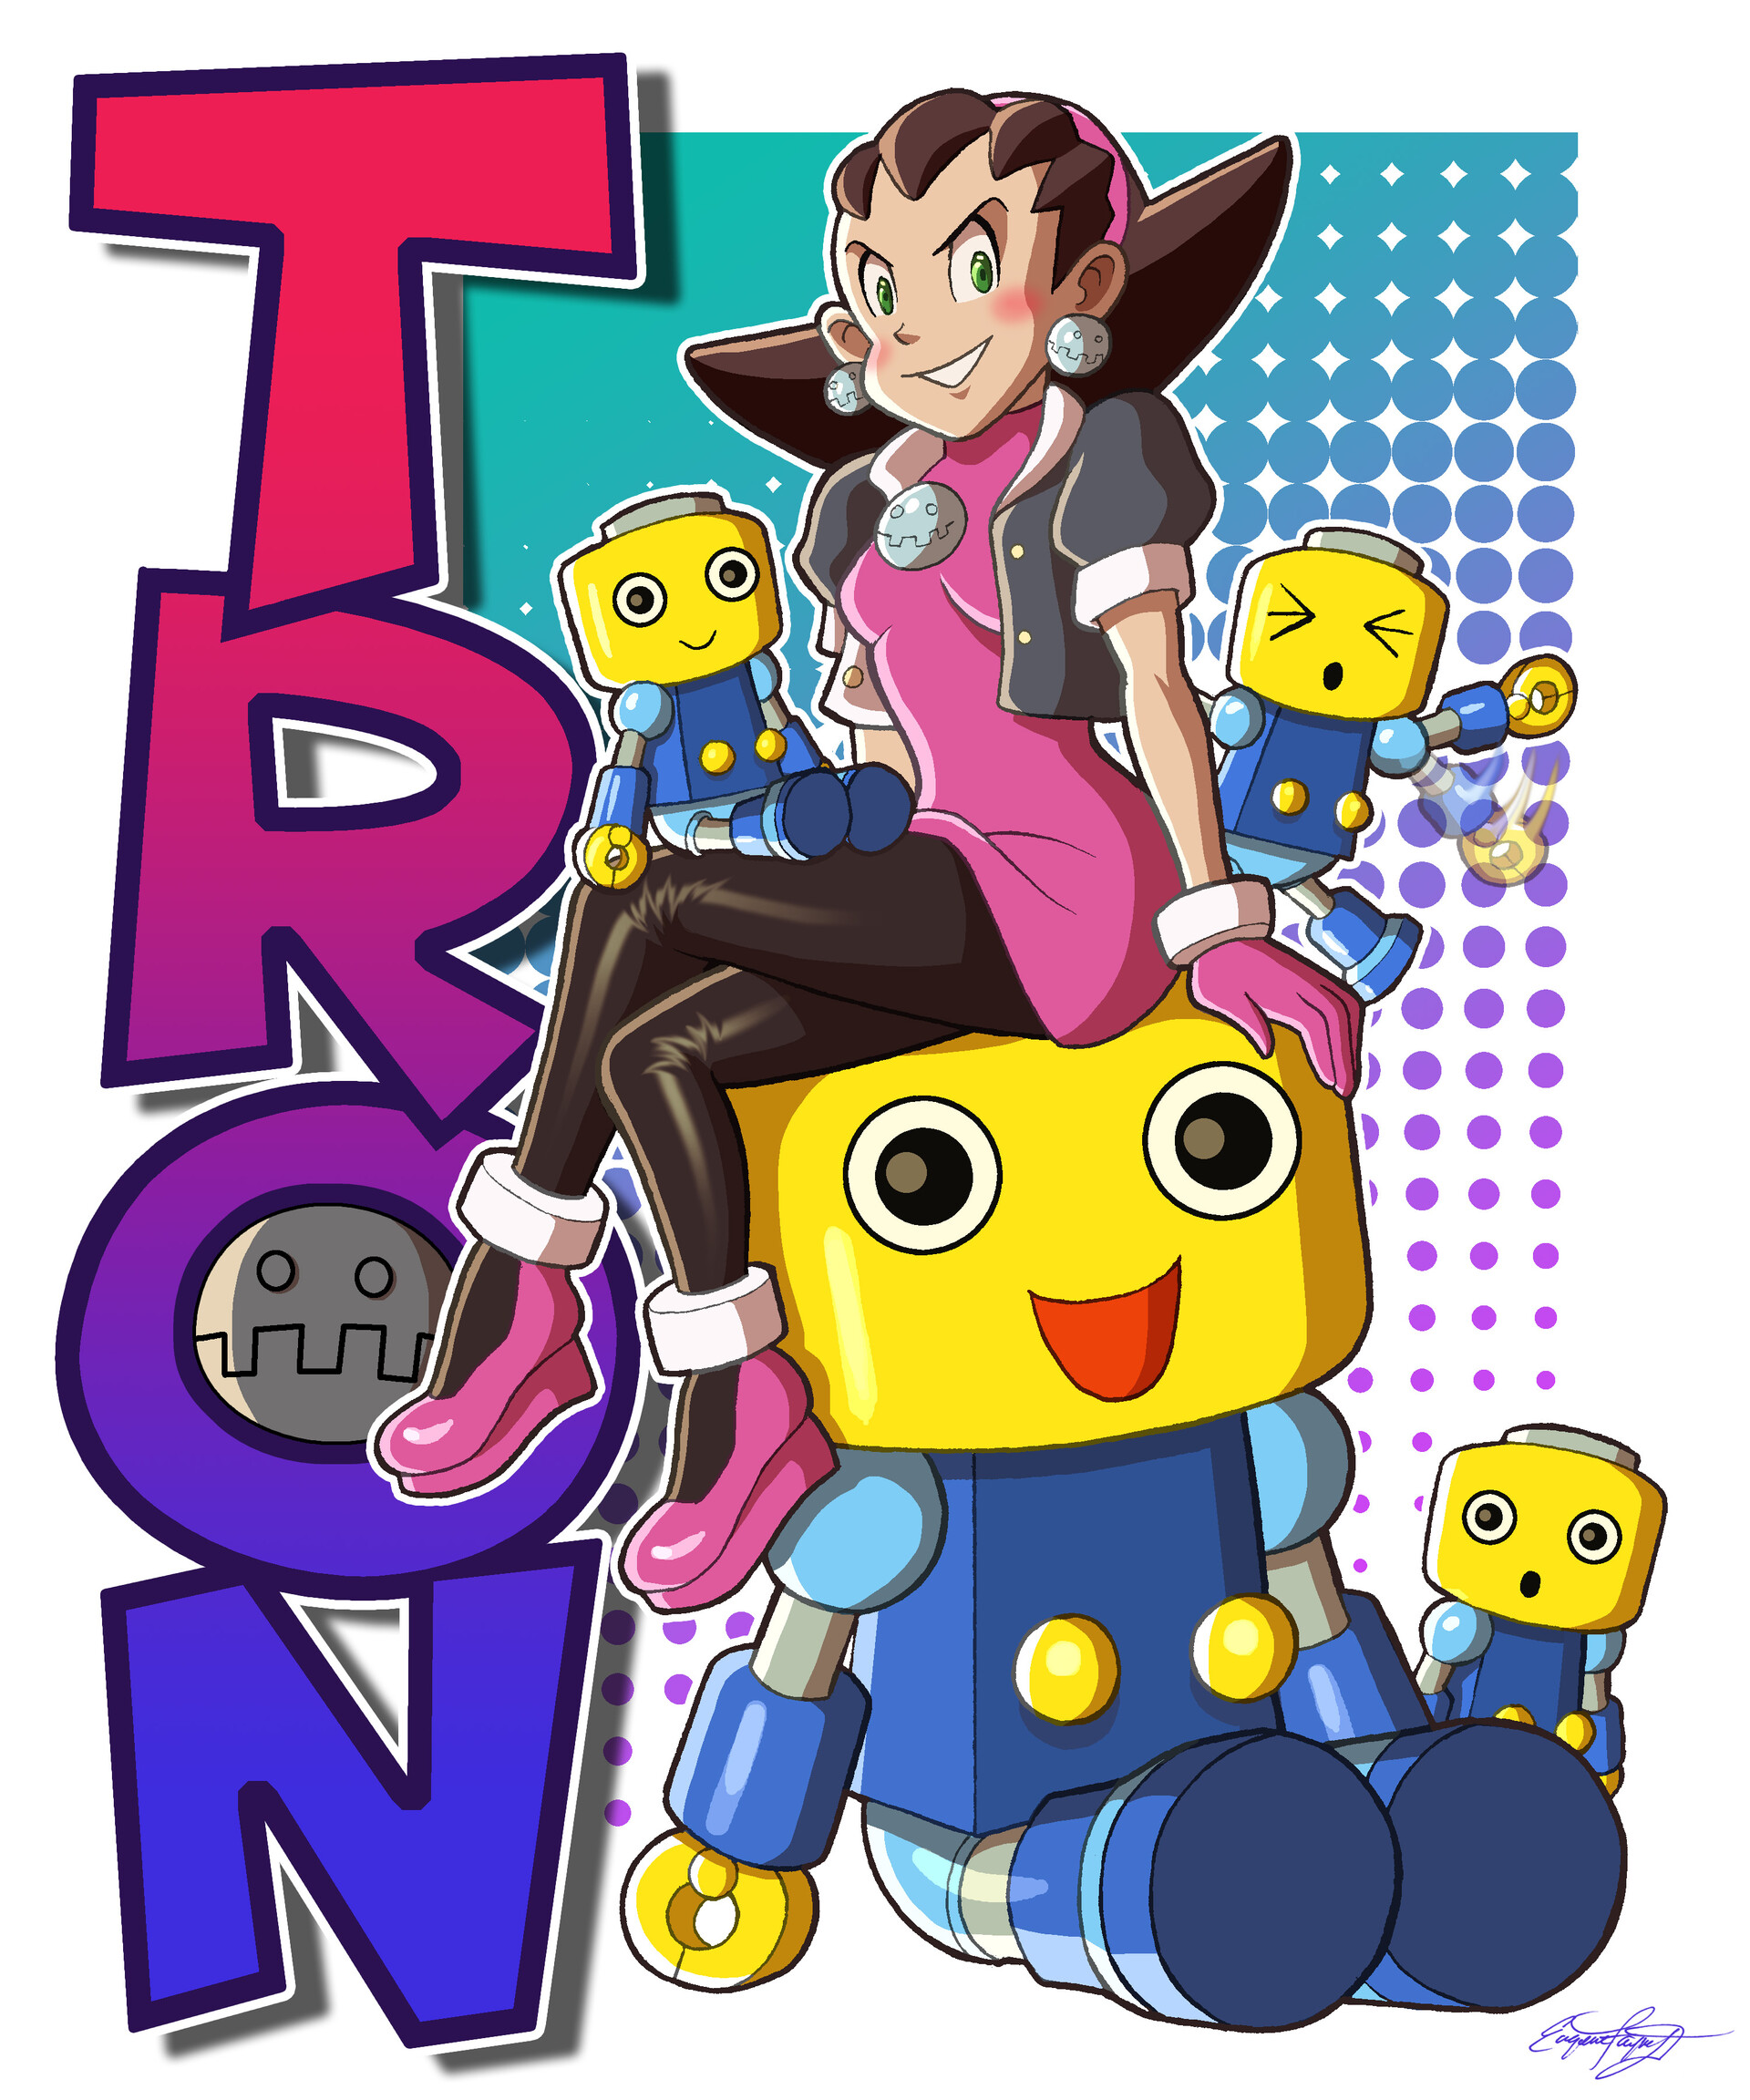 Capcom's Tron Bonne and her Servbots from the Megaman Legends series.